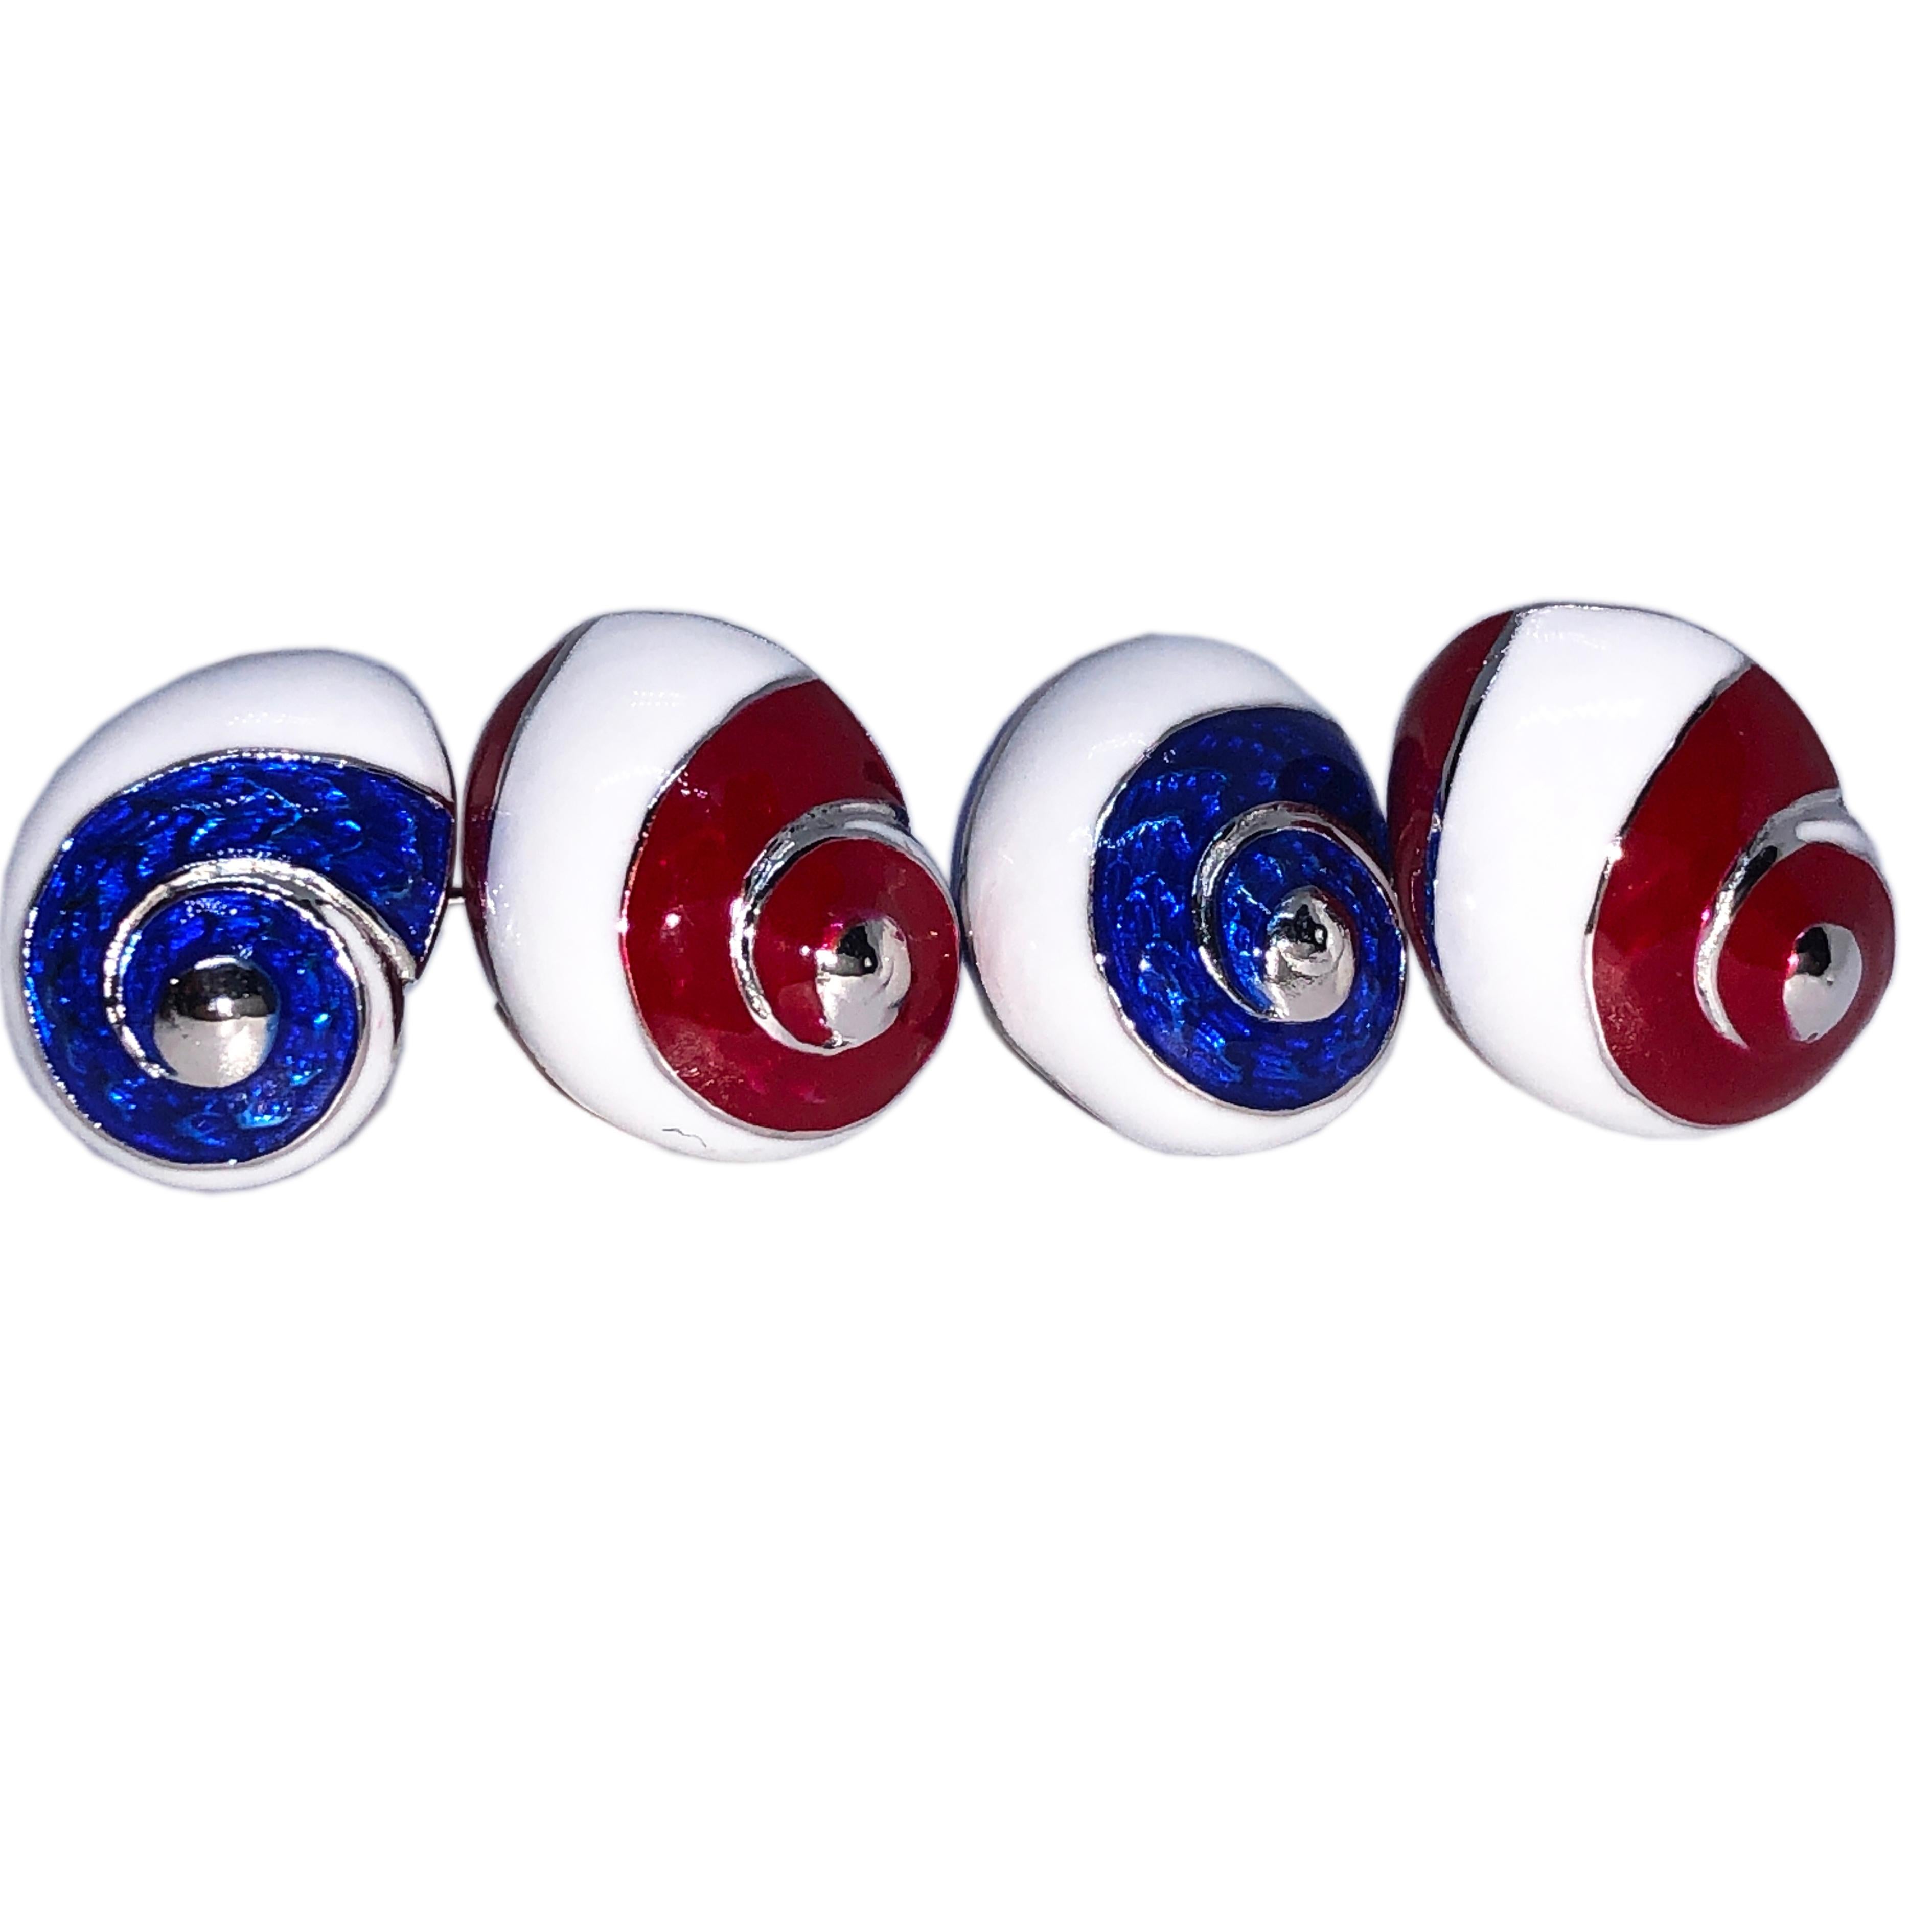 Berca White Red Blue Hand Enameled Seashell Shaped Sterling Silver Cufflinks 8